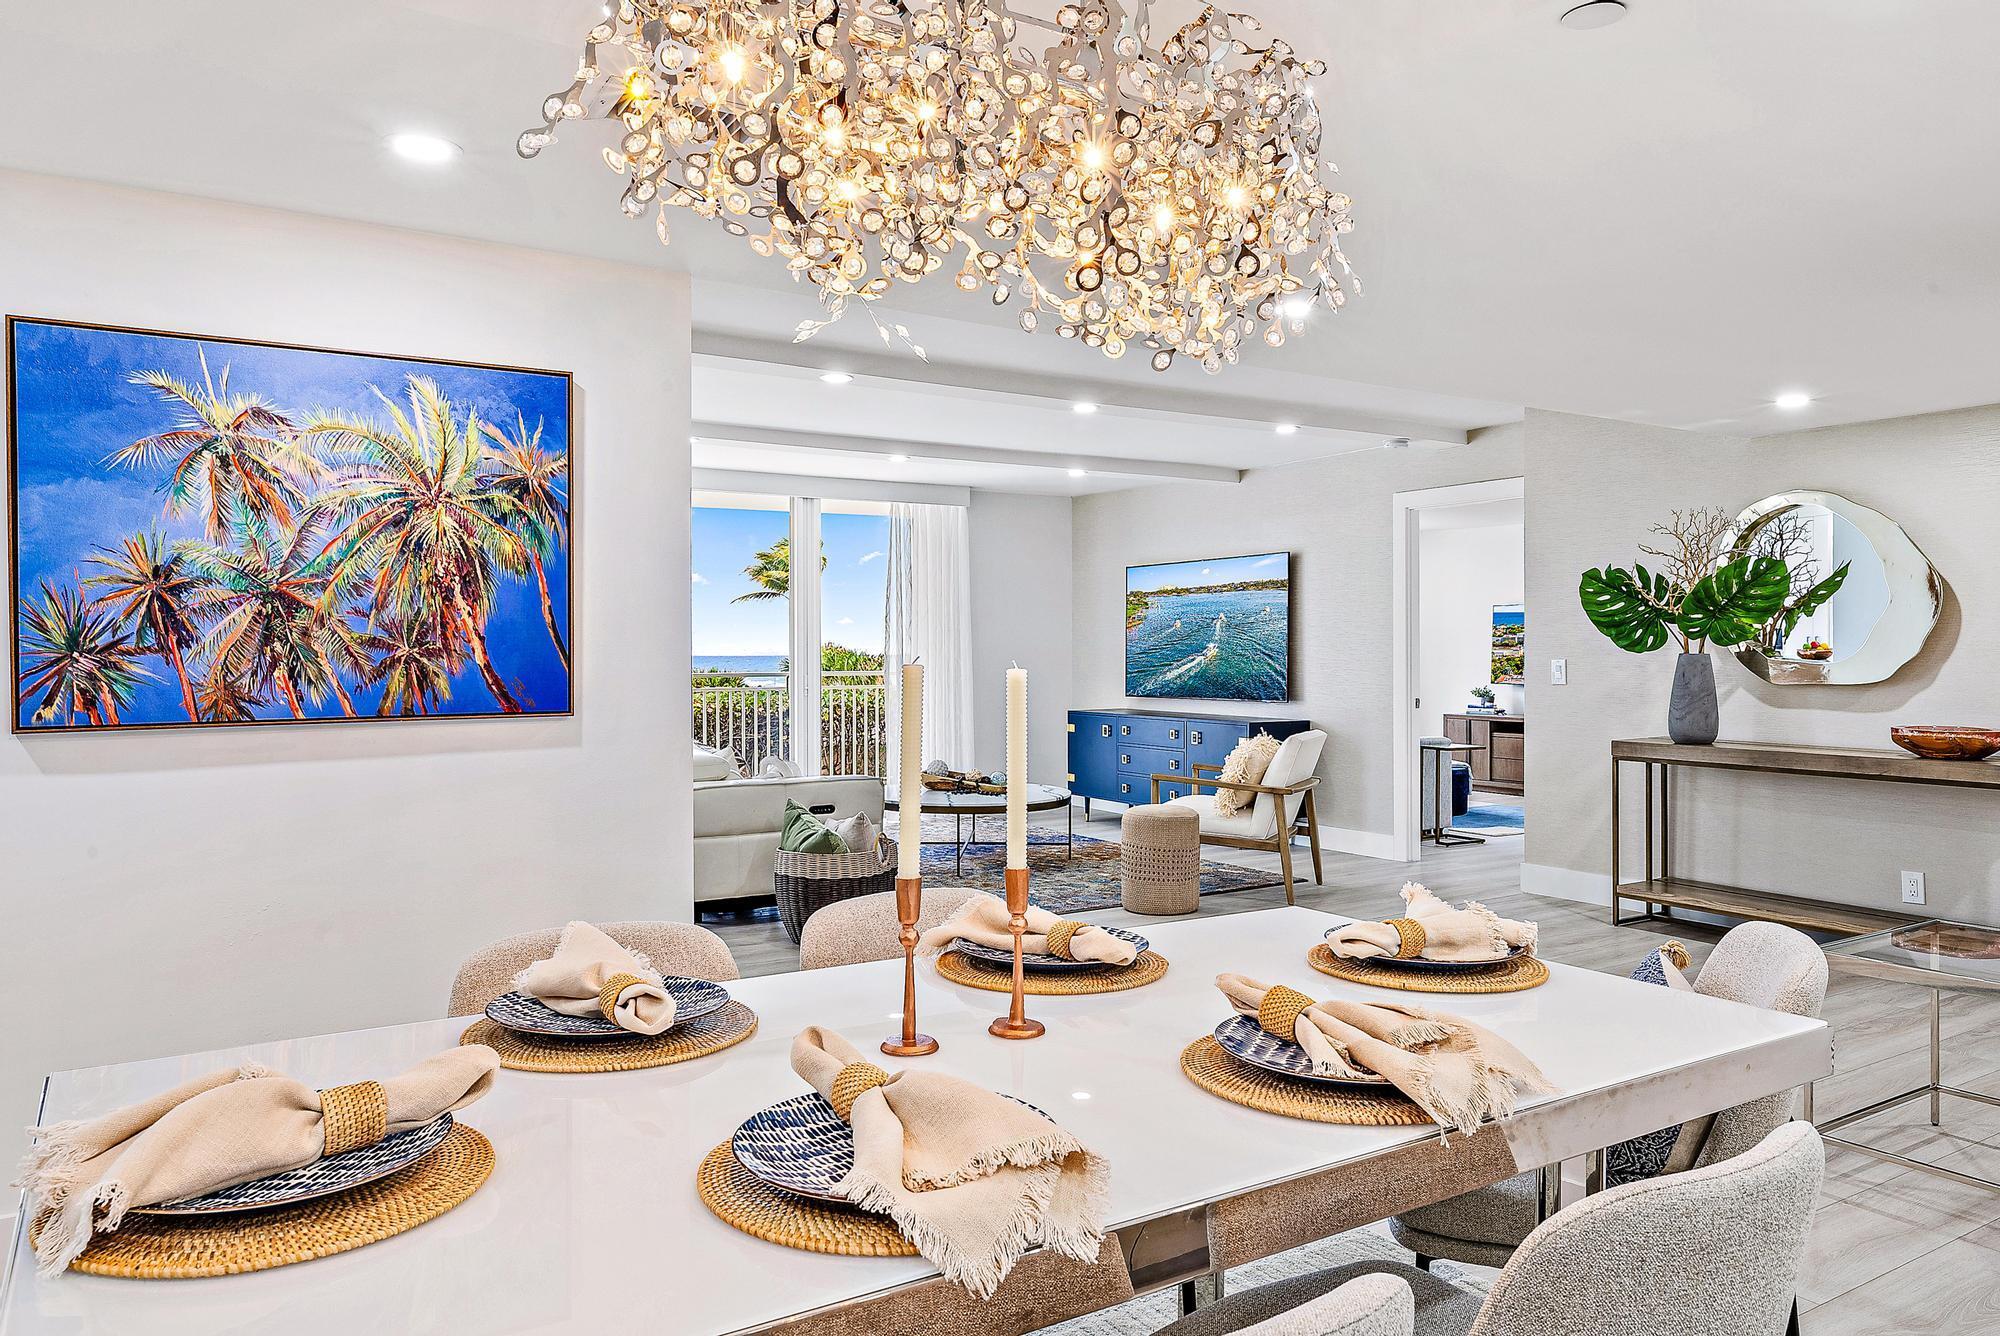 This PROFESSIONALLY REDESIGNED + RENOVATED 2 BR/2 BA LUXURY OCEAN CONDO is a ''one of a kind'' coastal home. Enjoy CUSTOM KITCHEN with high end finishes and appliances, MARBLE SPA BATHS + SLEEK BUILT-IN'S,  top of the line LVP FLOORS, a BOXED BEAM CEILING w/integrated LED lighting, PGT IMPACT WINDOWS/DOORS, ample storage, FORMAL DINING, GORGEOUS VIEWS and HIGH EFFICIENCY AC. Brigadoon is one of the ''LOWEST PER SF BEACH CONDOS'' in prime condition, already structurally certified + fully reserved. The 2 bldg, 96 unit complex features: GARAGE PARKING, DEDICATED BEACH access, heated pool, clubhouse, cabanas on the green, fitness center w/saunas. Location is ideal...walking distance to the Juno Beach Pier, the Jupiter Dog Park, dining + shops and only 20 minutes to PBIA.